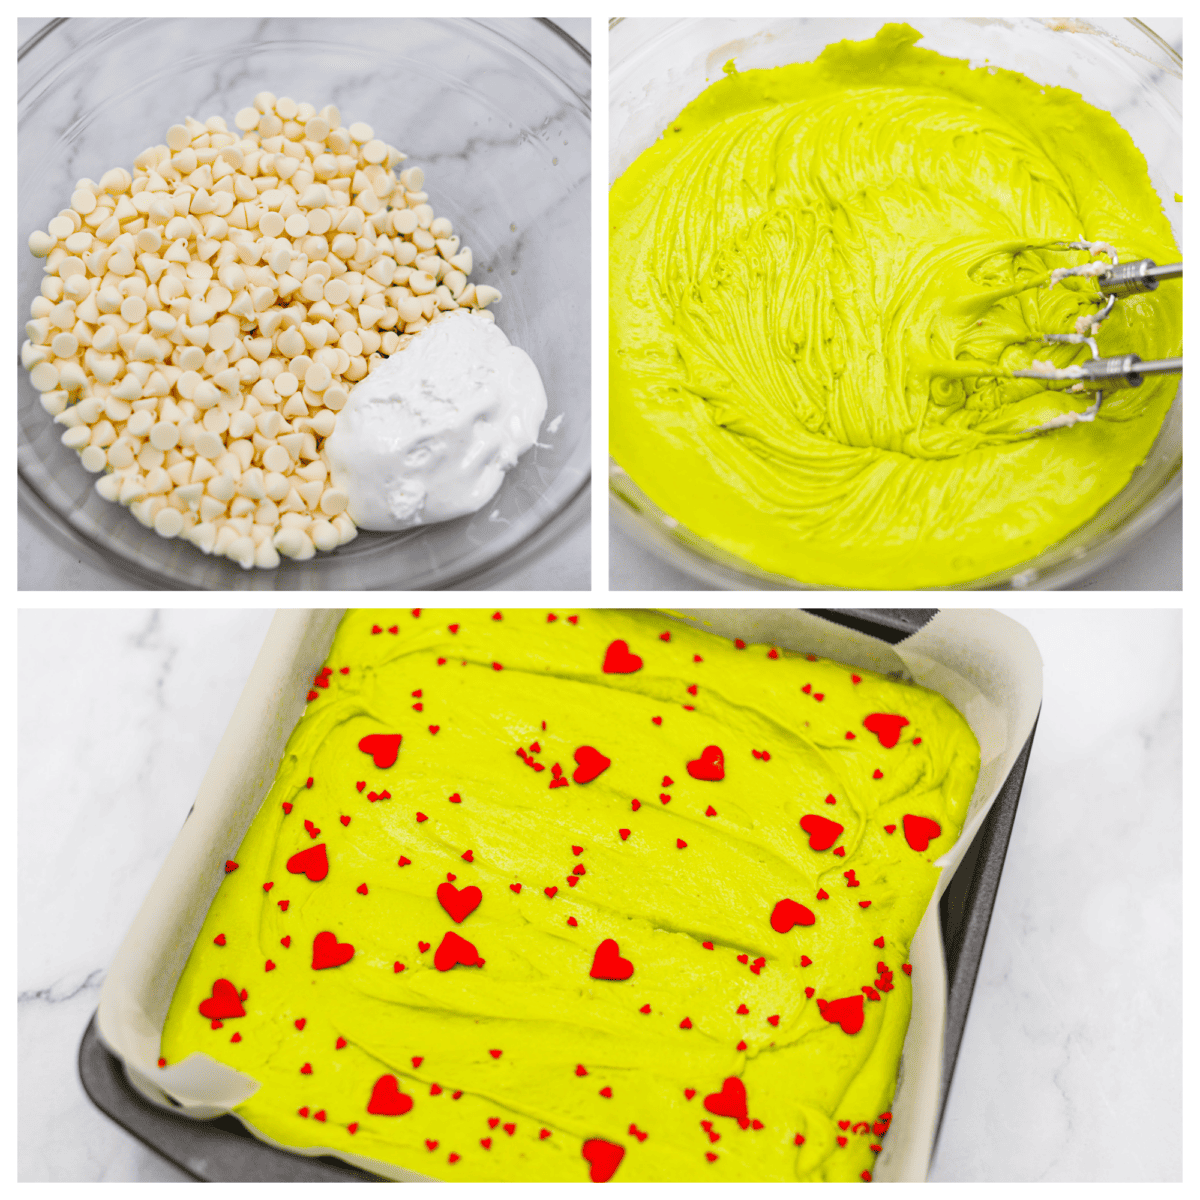 3 pictures showing how to mix ingredients, add food coloring and pour into a pan to set. 